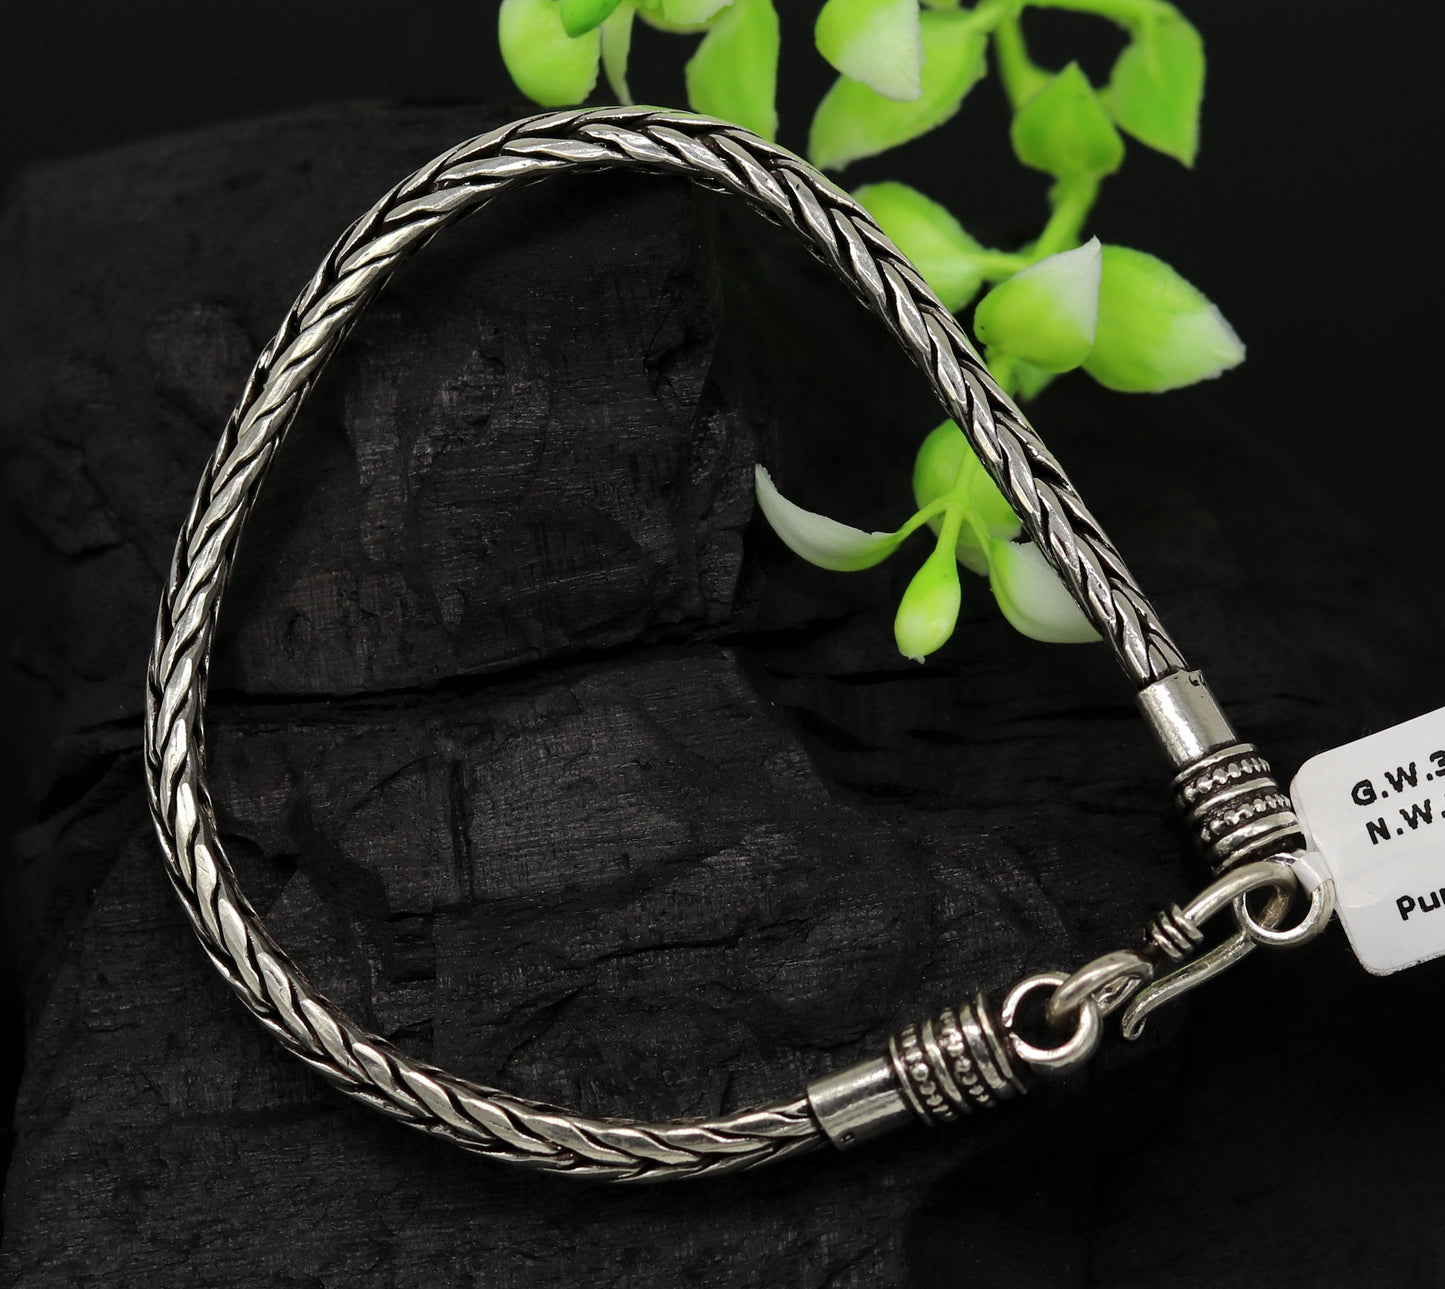 8.5" long handmade 925 sterling silver gorgeous customized vintage design wheat chain bracelet unisex personalized gifting jewelry nsbr35 - TRIBAL ORNAMENTS